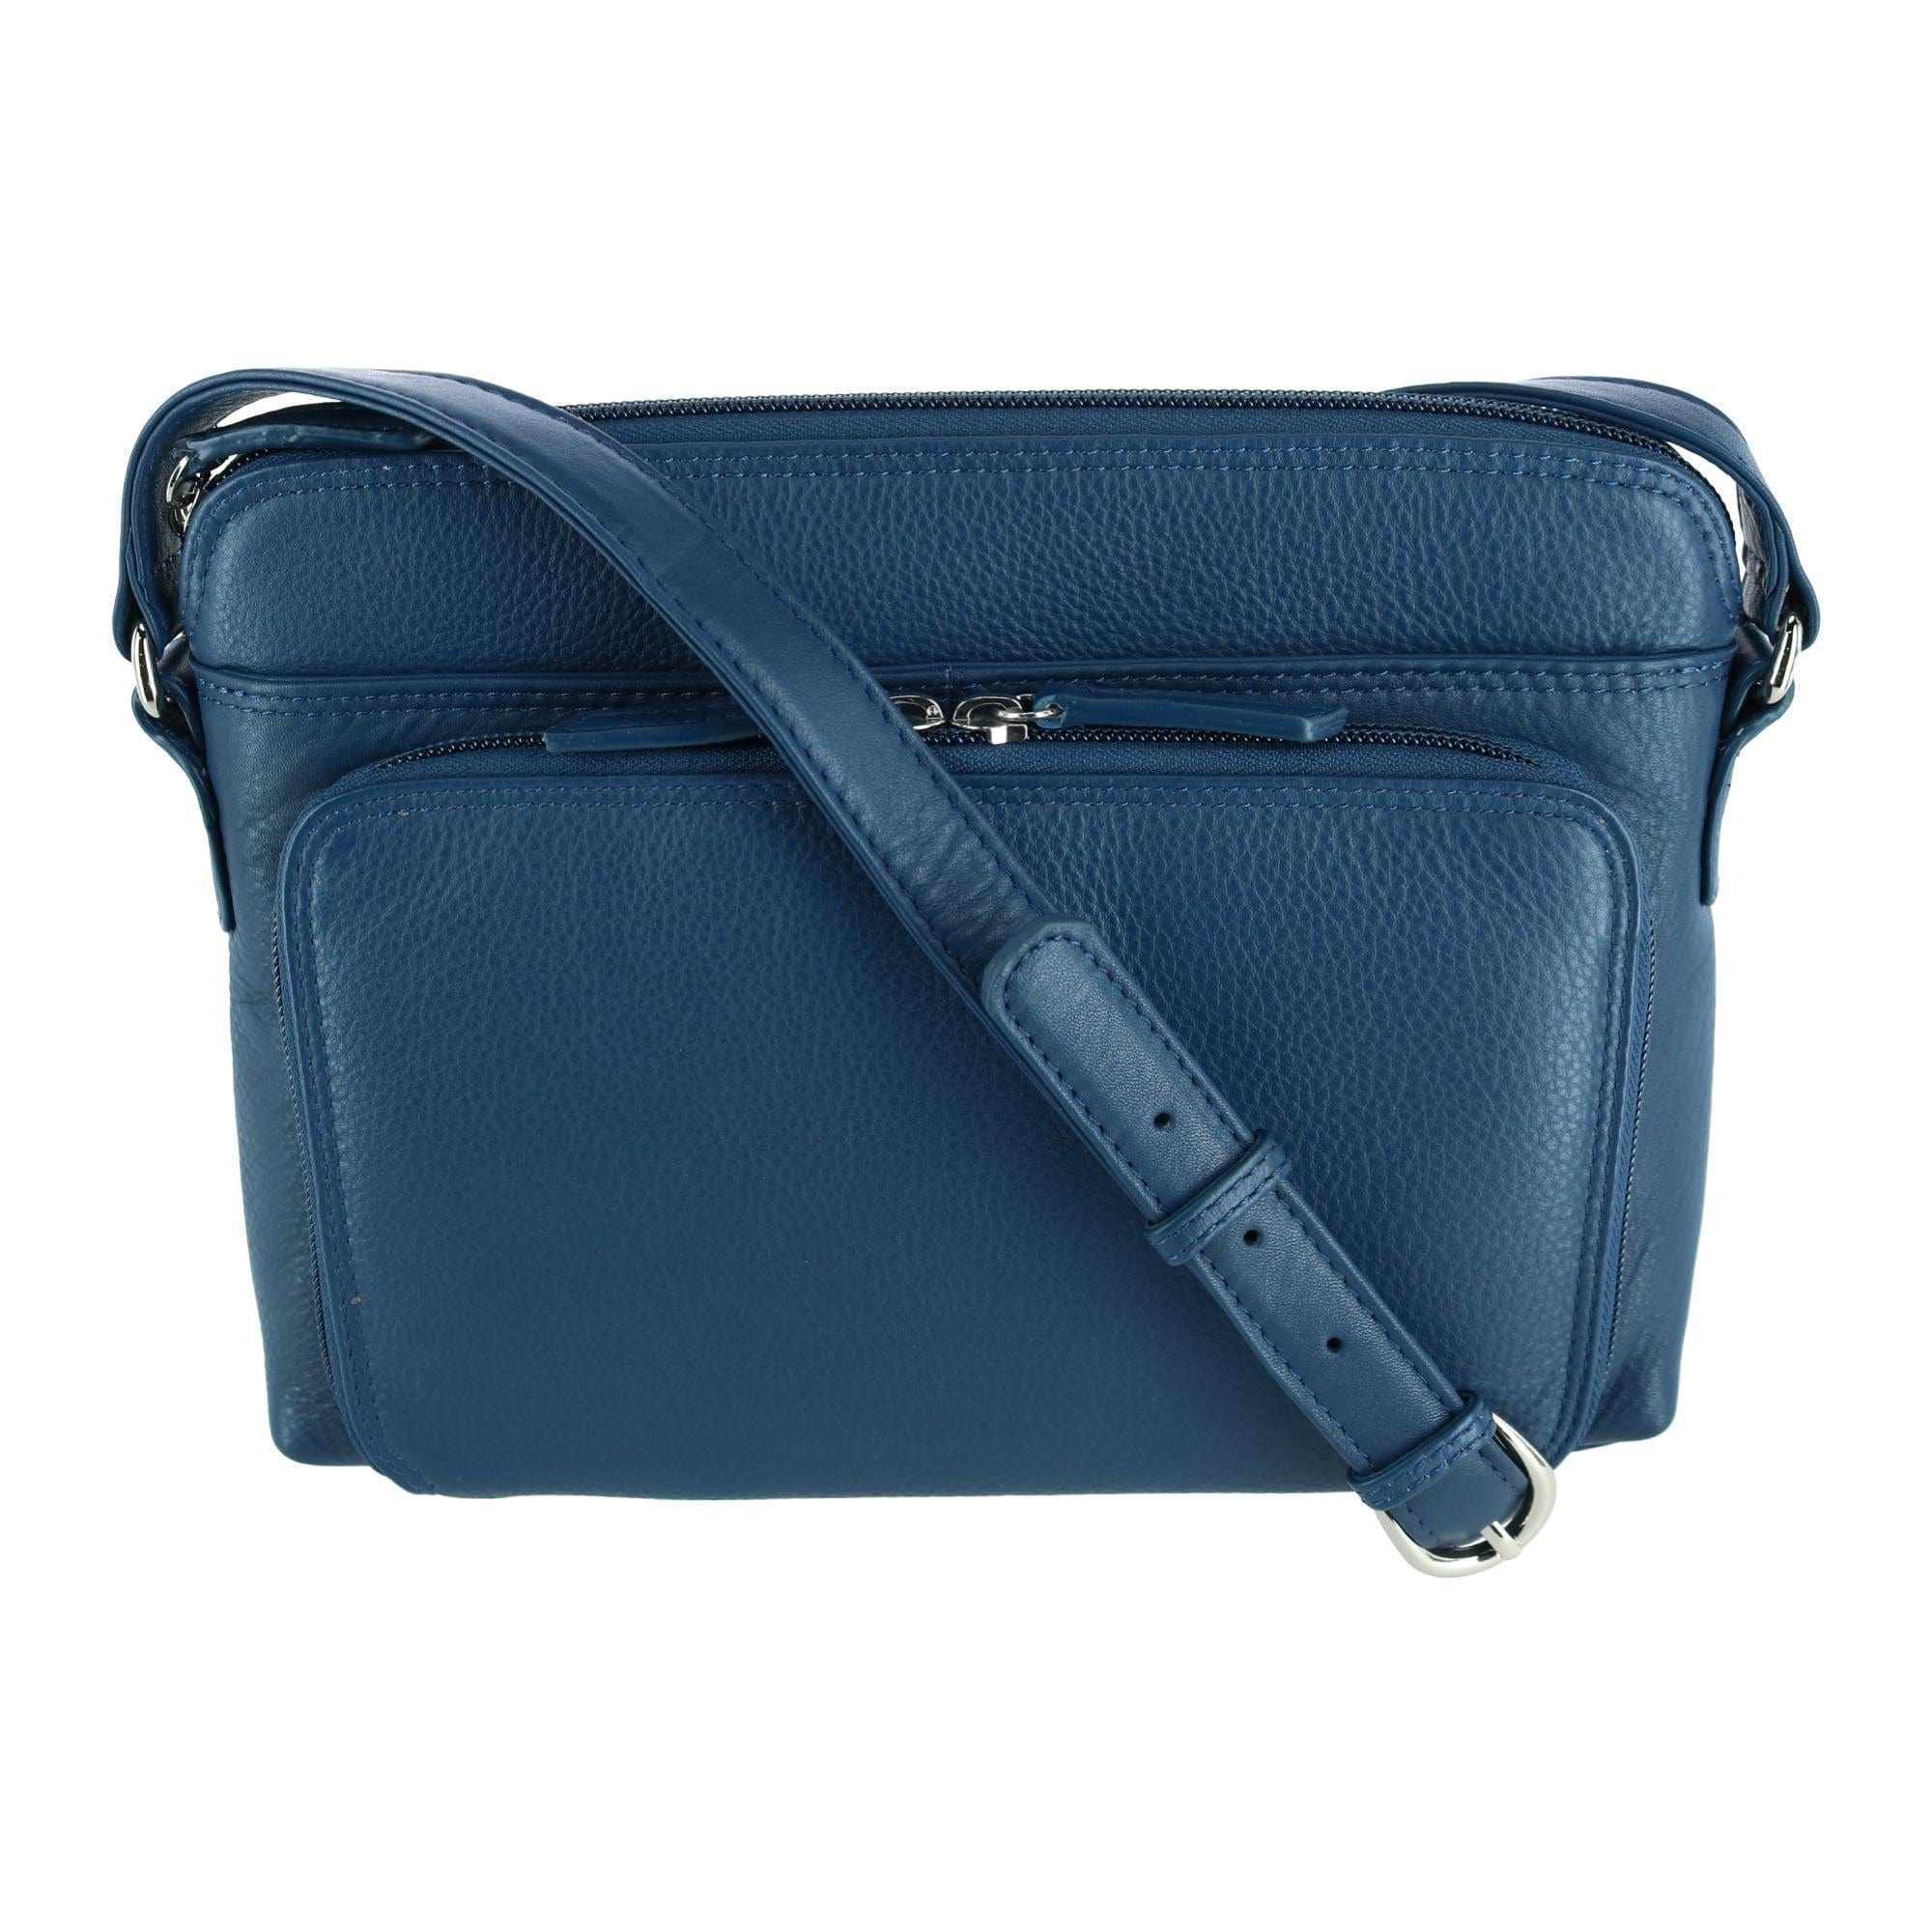 C leather crossbody bag Chloé Navy in Leather - 27565637